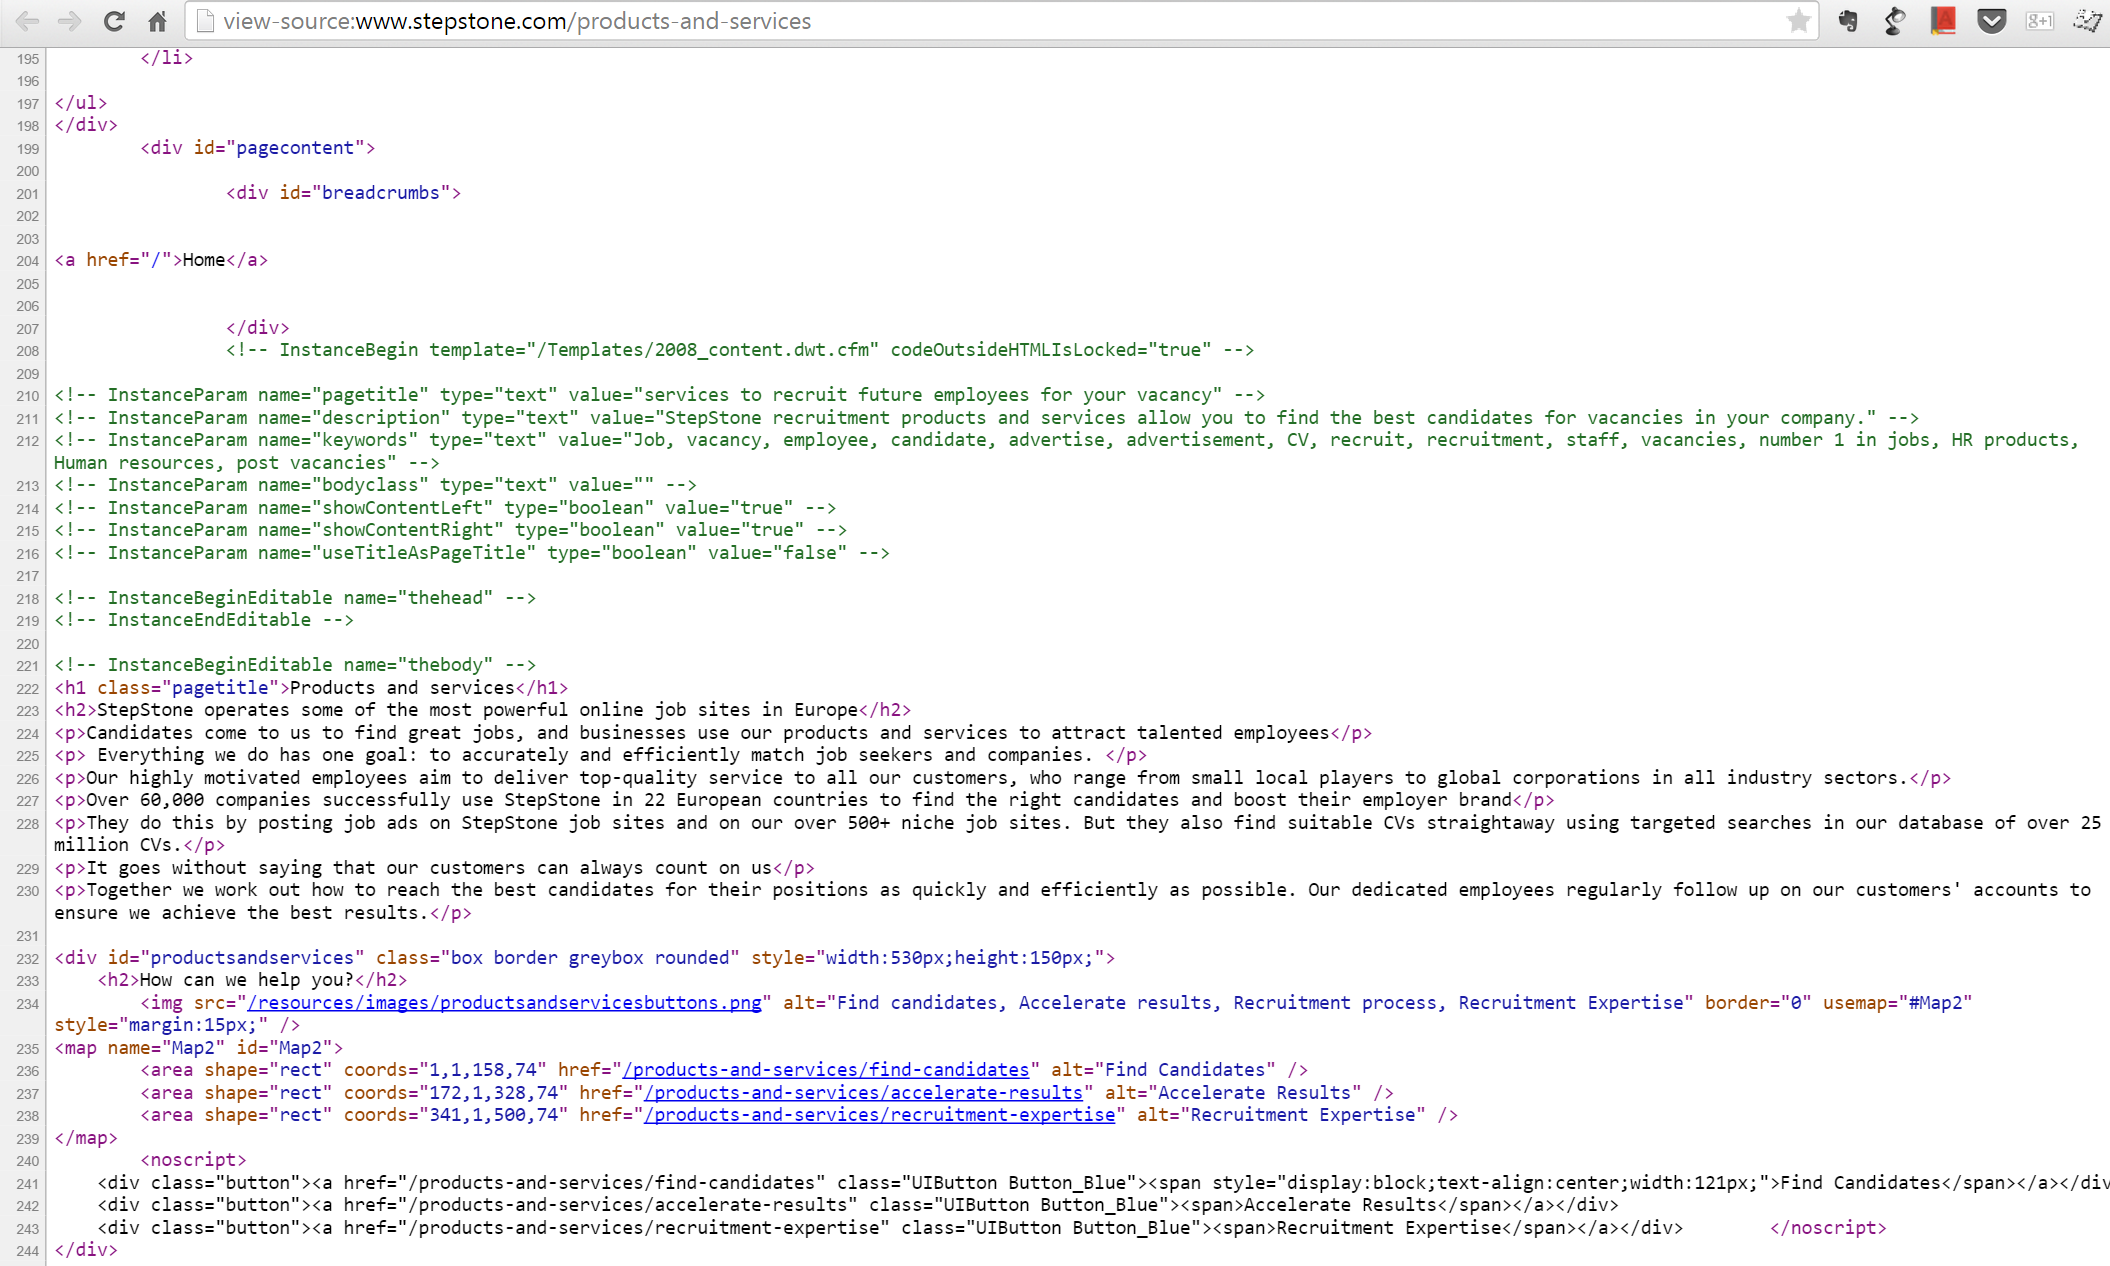 Stepstone.com Source code still containing the Dreamweaver template comments